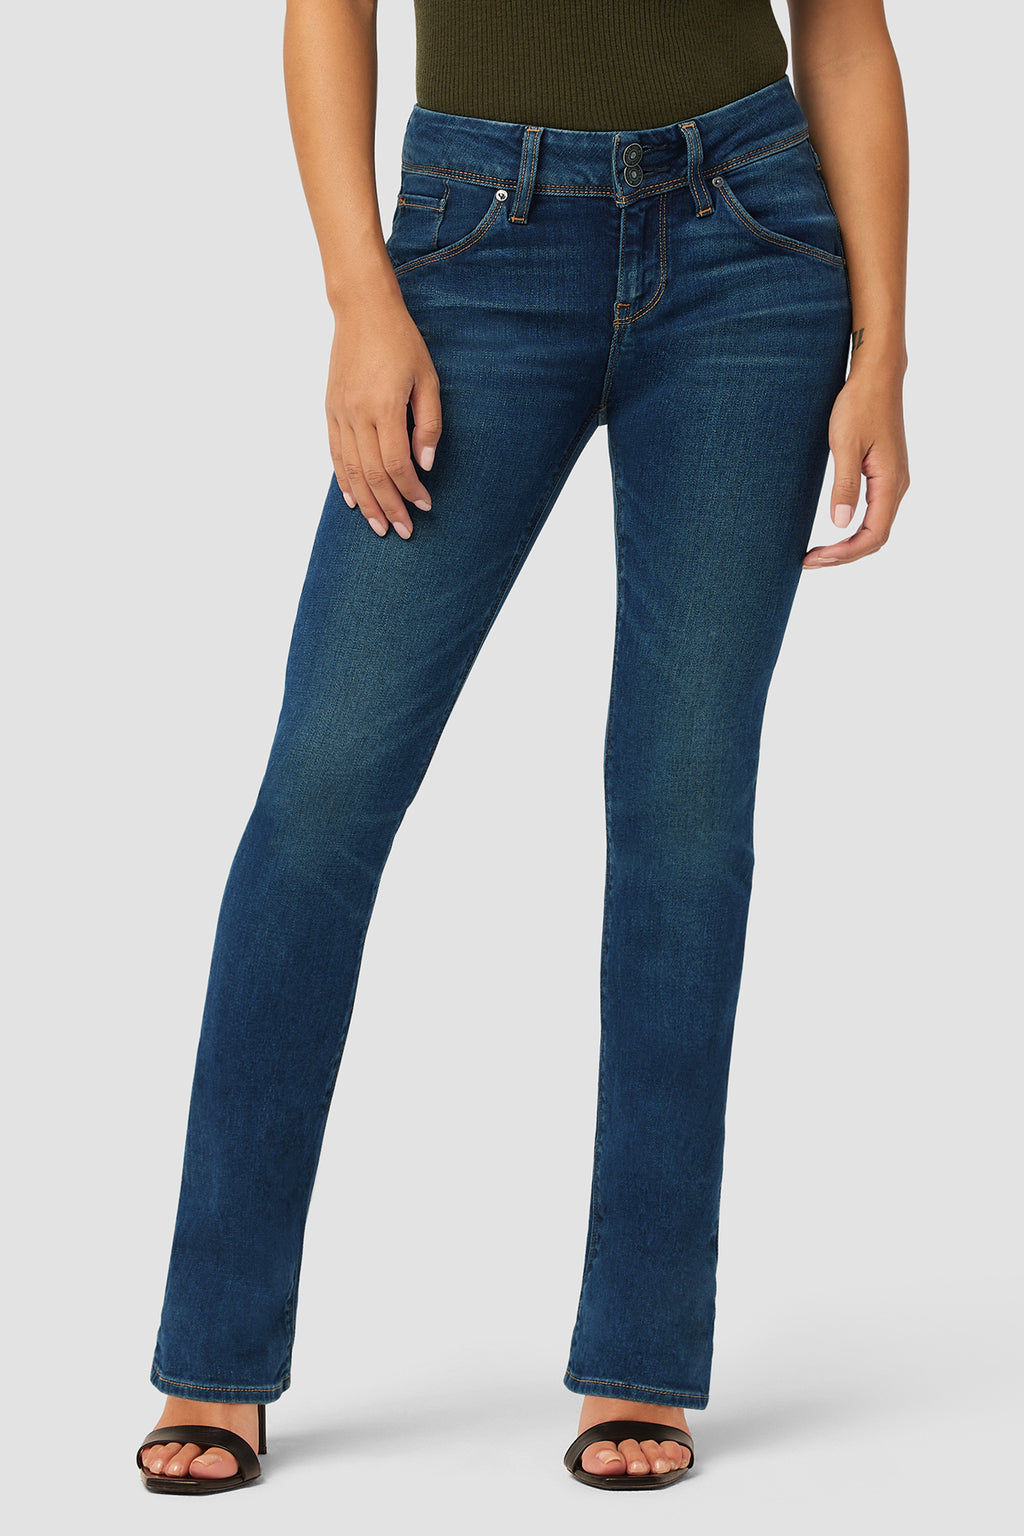 Beth Mid-Rise Baby Bootcut Petite Jean